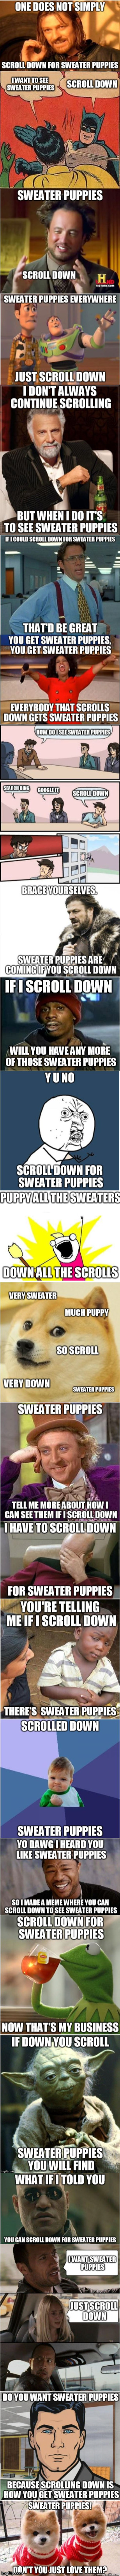 Ooooh.  Dem Sweater puppies | image tagged in memes,sweater puppies,broke my scroll wheel | made w/ Imgflip meme maker